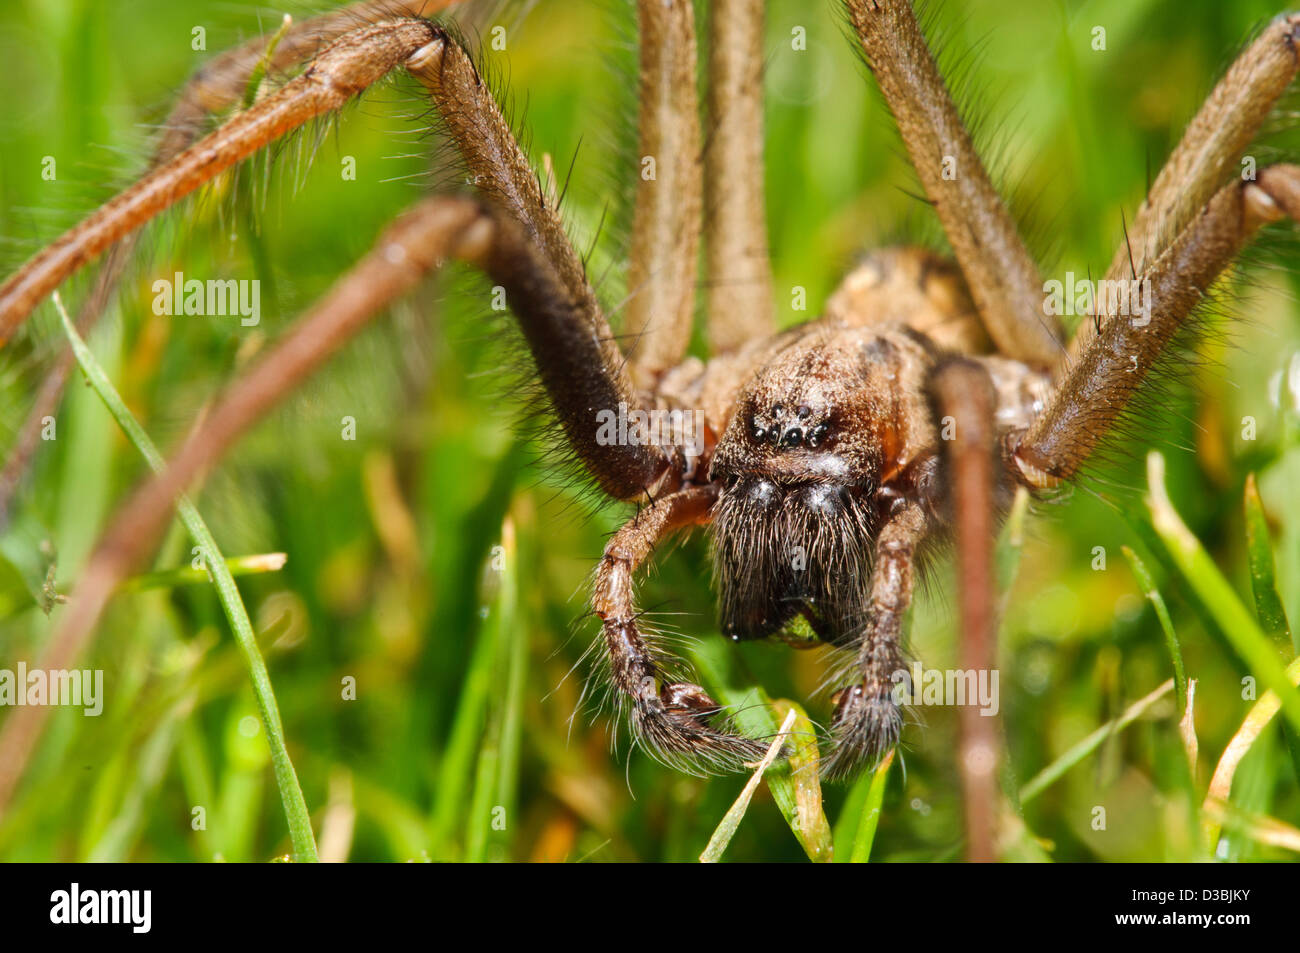 An adult male house spider (Tegenaria gigantea) walking across a lawn (having been ejected from the house). Stock Photo